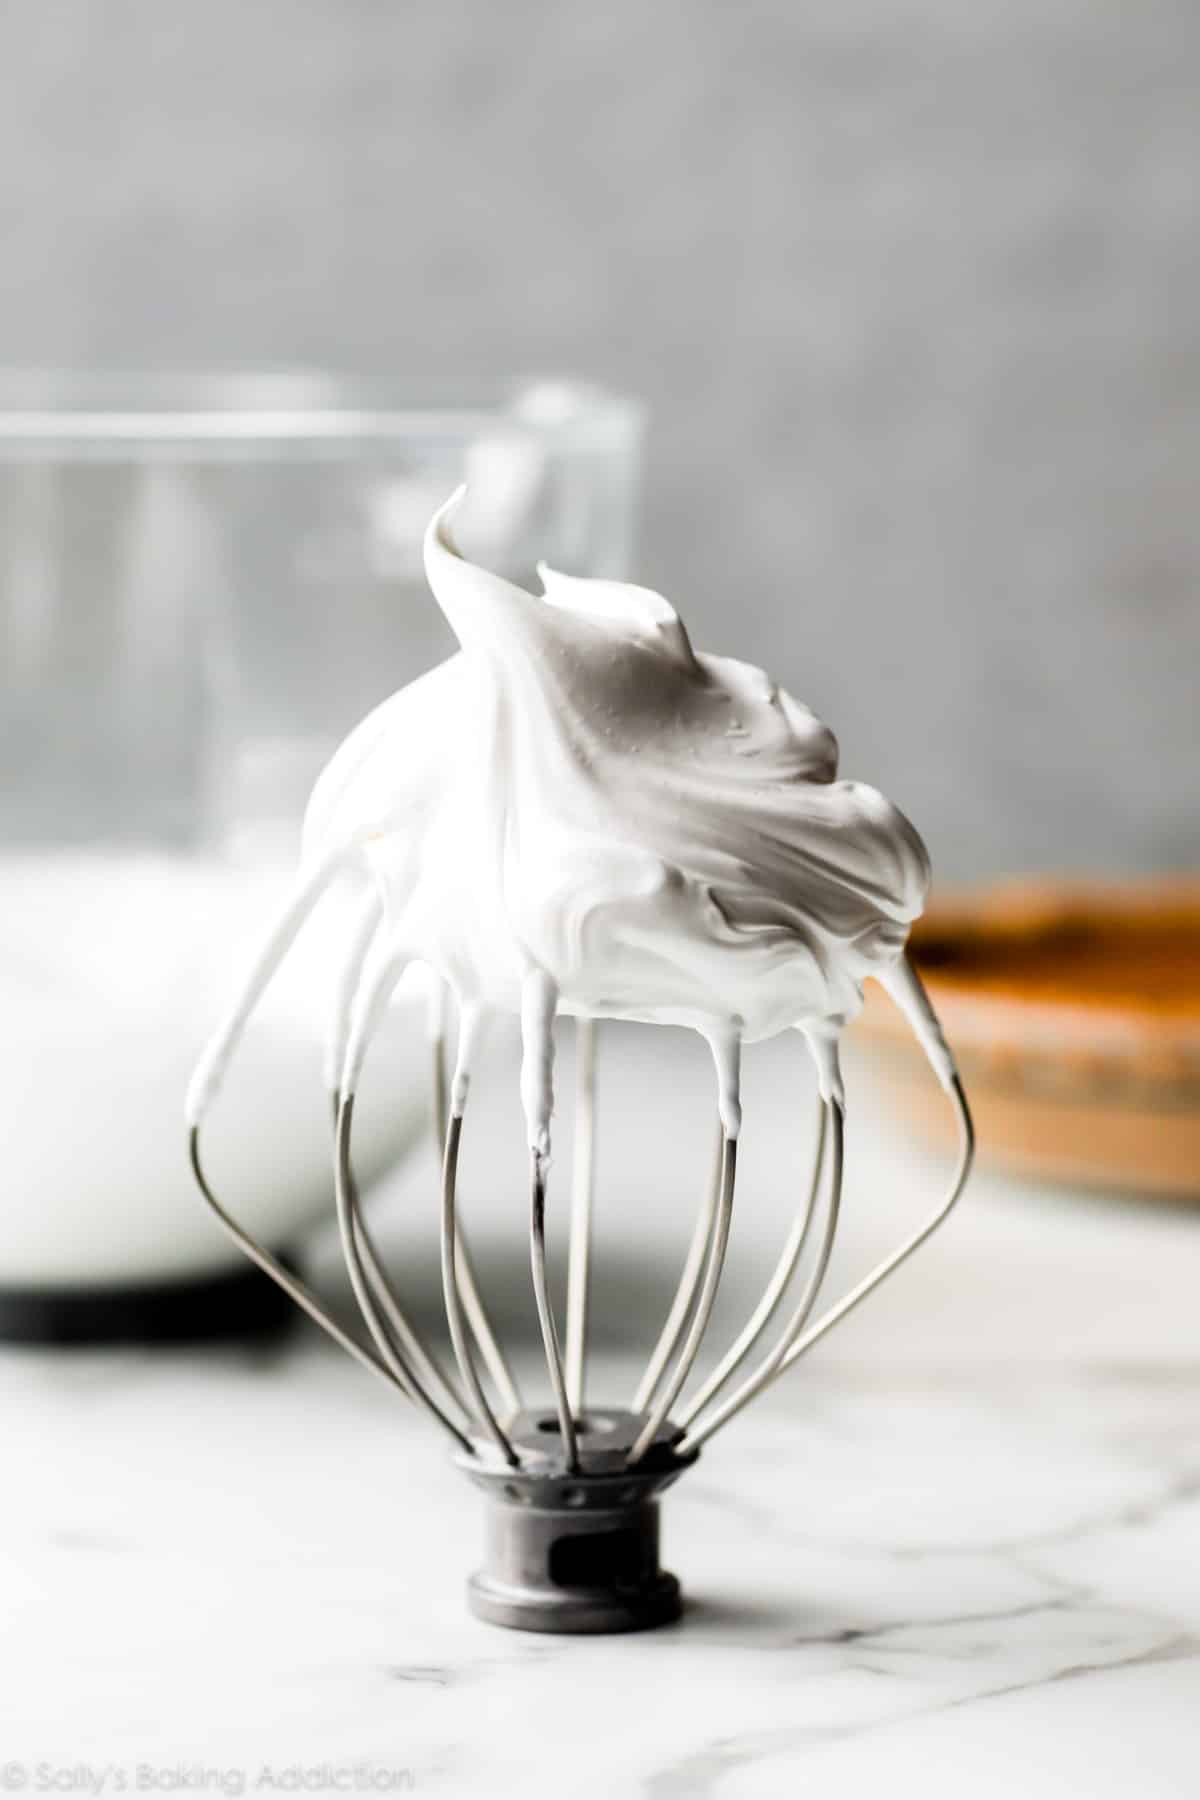 meringue sitting on a whisk attachment